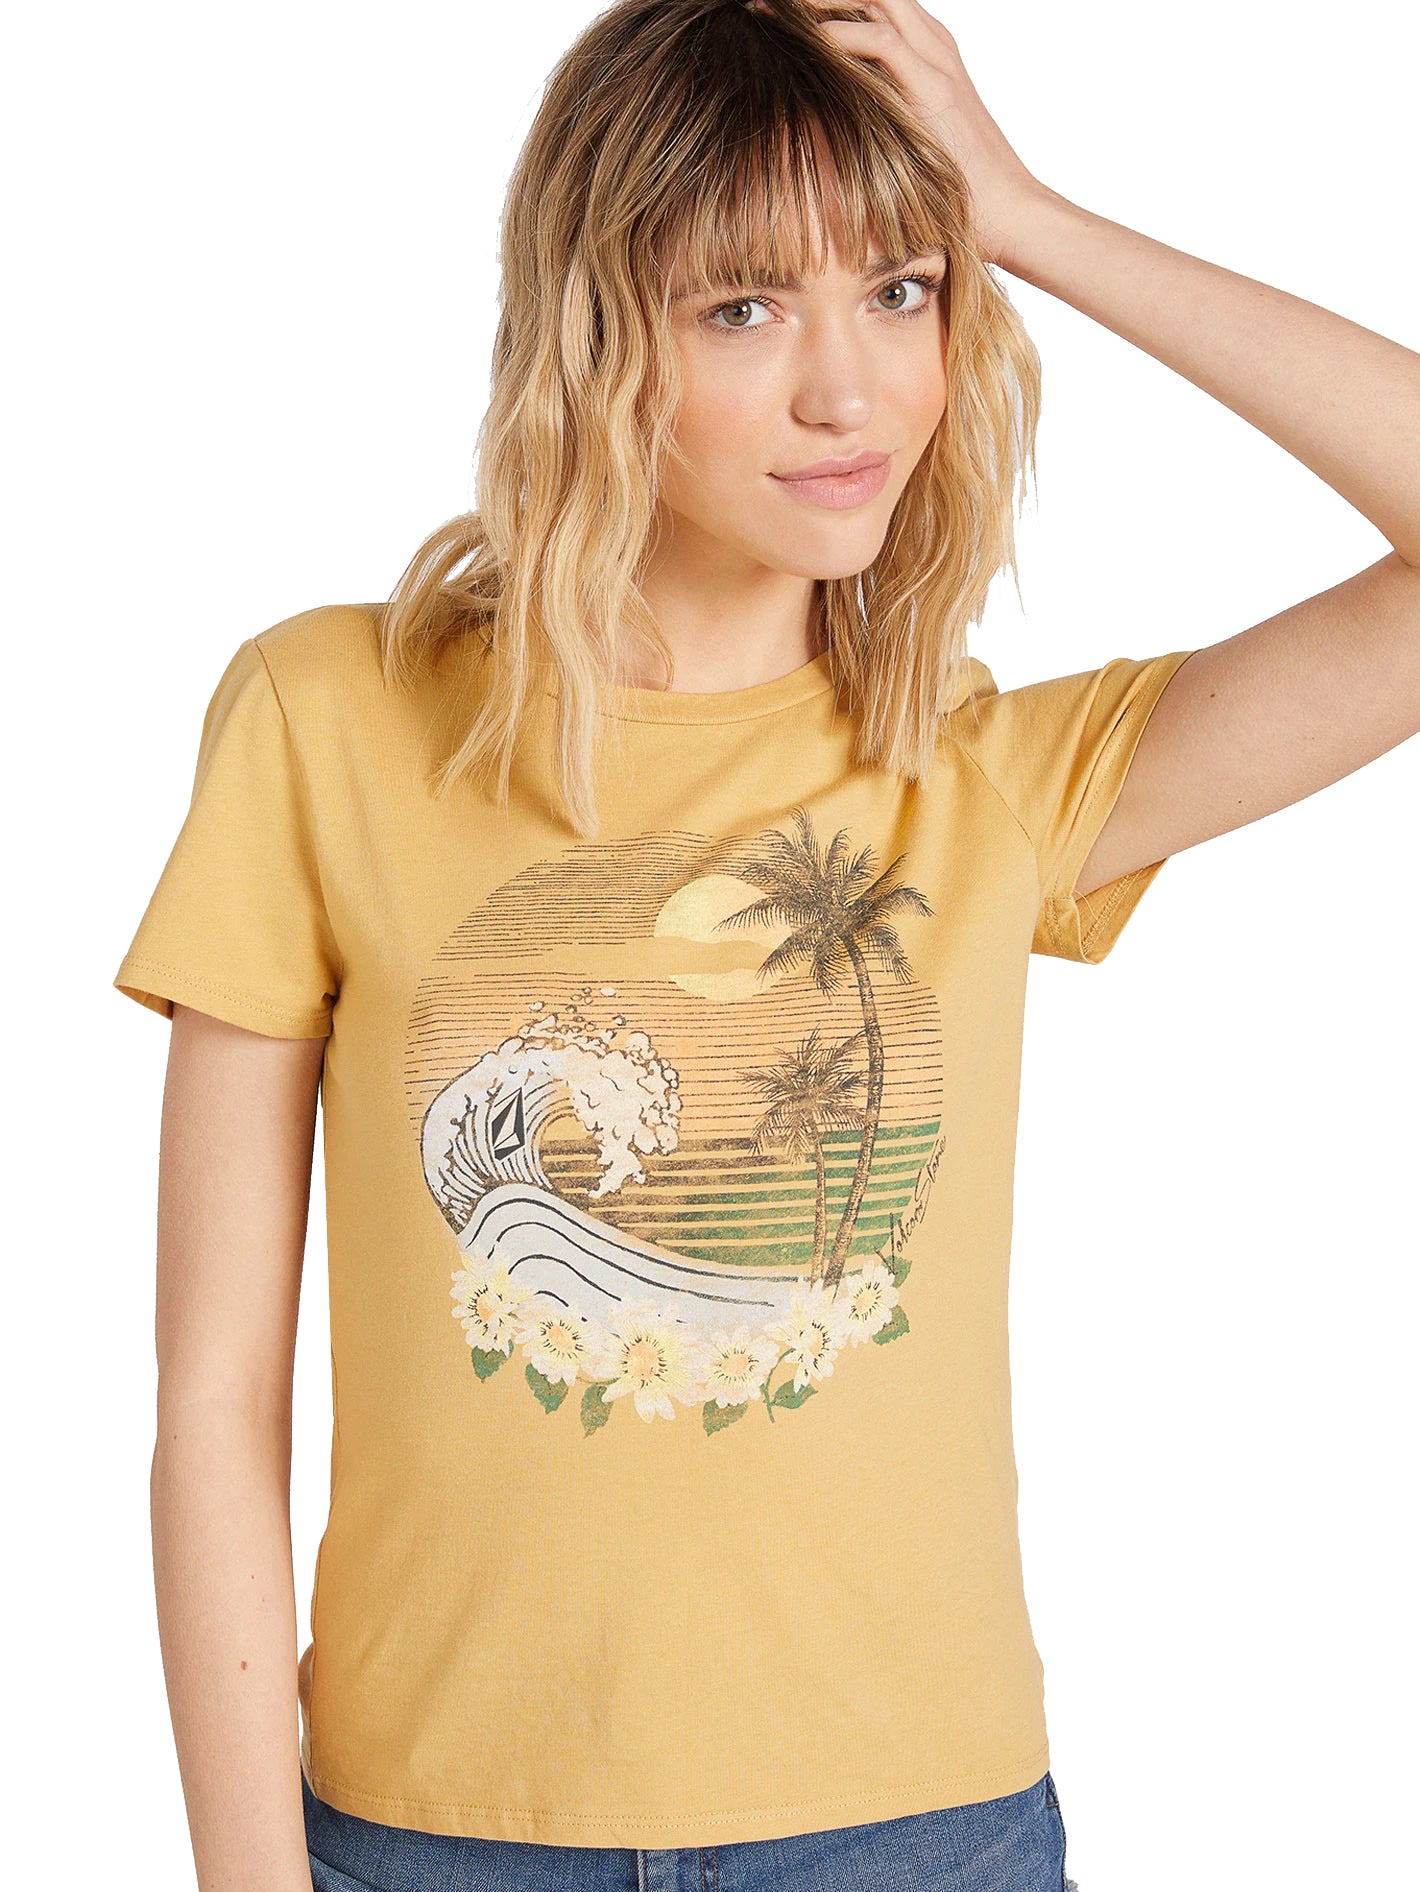 Volcom Stoked On Stone Graphic Tee DGD L